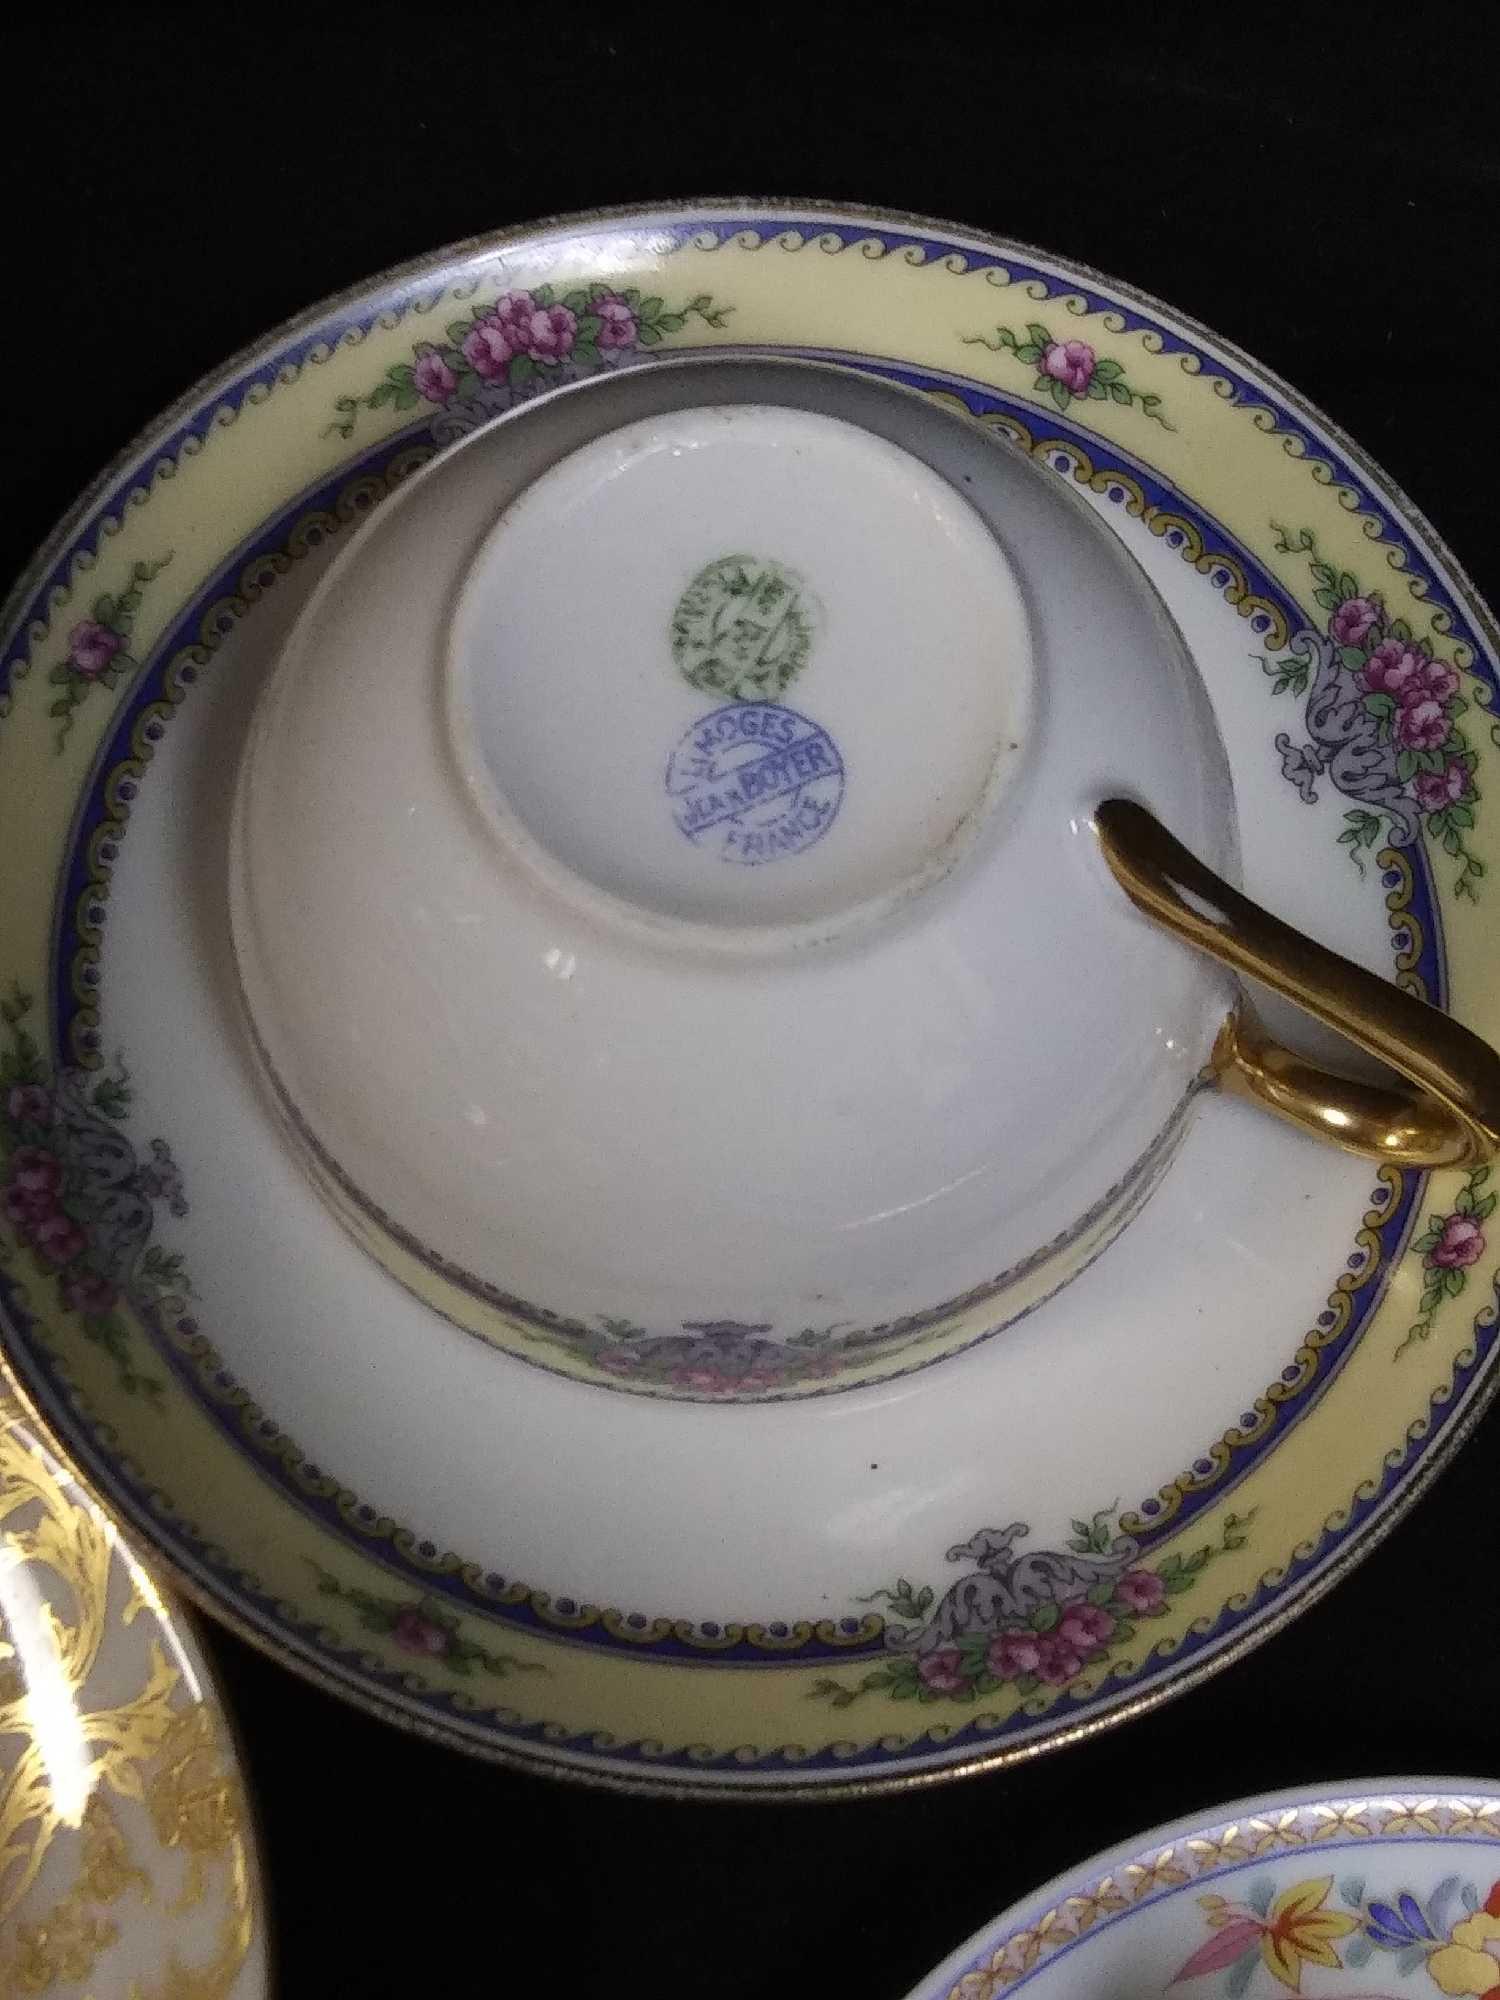 Garden Party: Lovely Trio of Mismatched Teacups and Saucers Sets